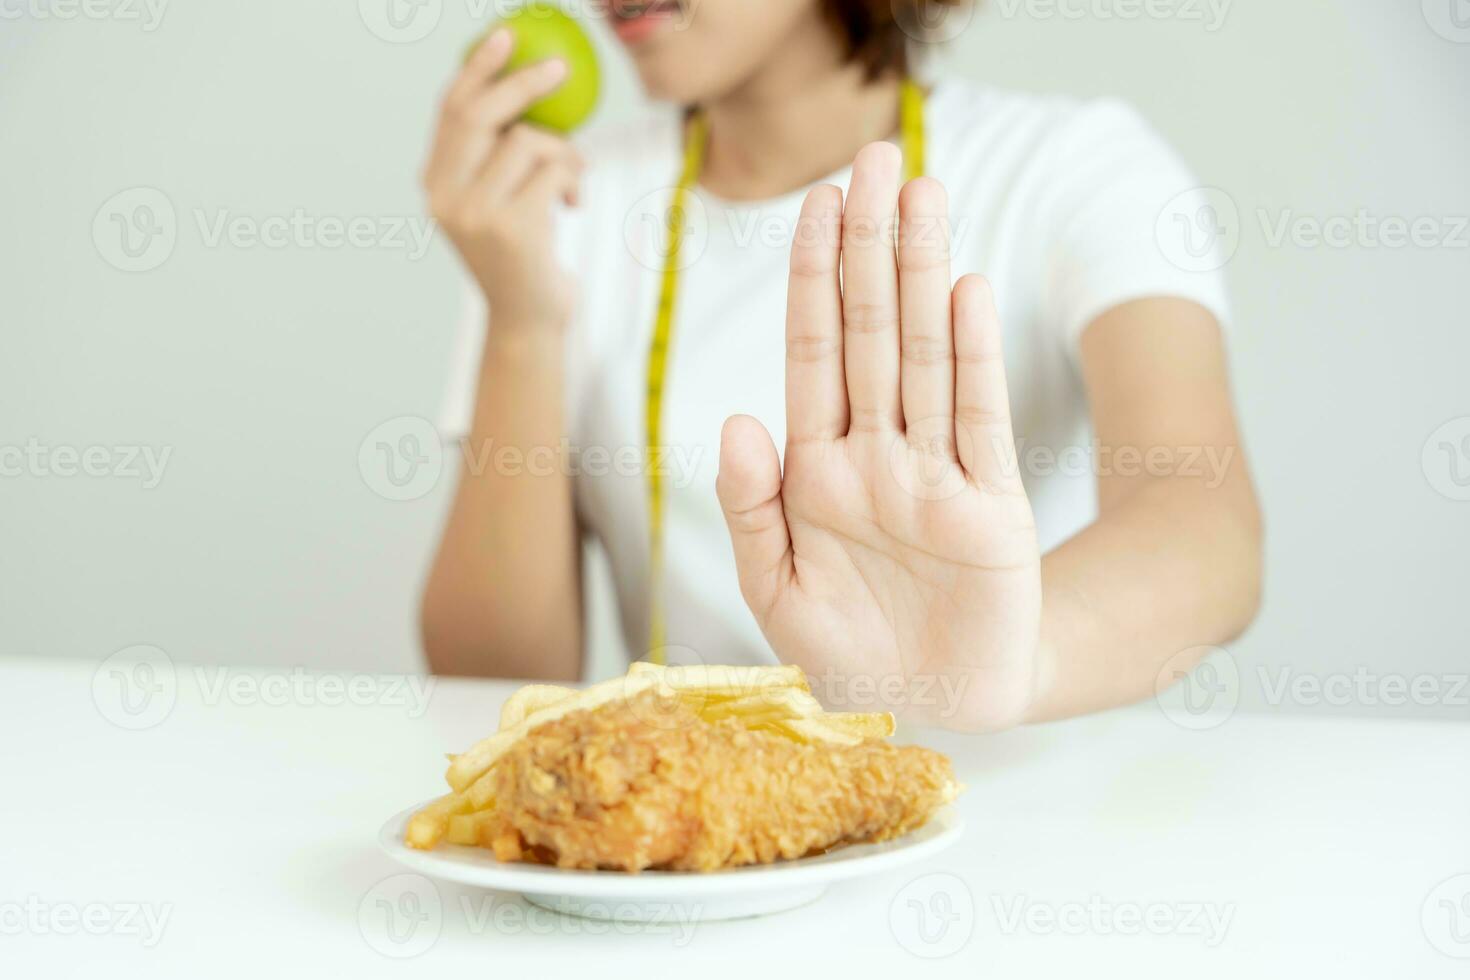 https://static.vecteezy.com/system/resources/previews/033/547/551/non_2x/slim-female-body-confuse-french-fries-and-fried-chicken-woman-in-restaurant-achieves-weight-loss-goal-for-healthy-life-crazy-about-thinness-thin-waist-nutritionist-diet-body-shape-photo.jpg